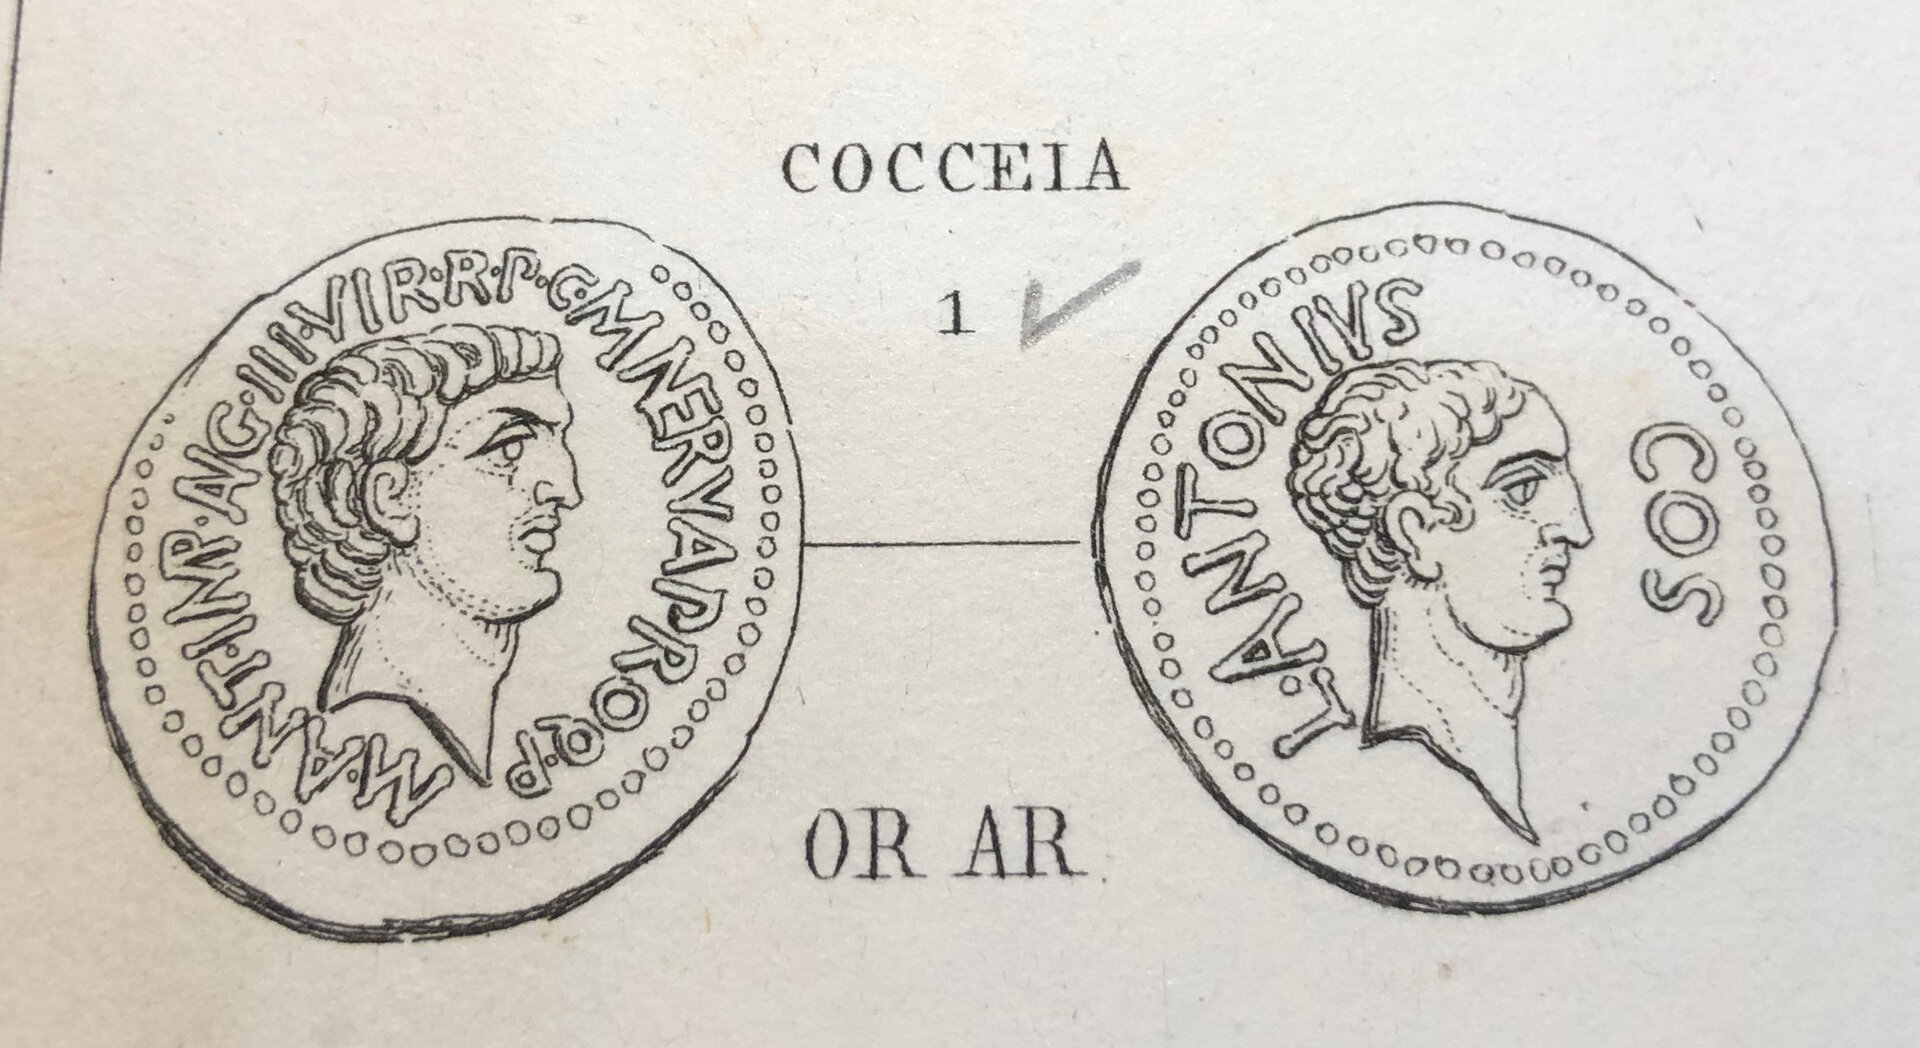 Marc & Lucius Antony with Nerva 517-5a Cohen Cocceia 1857.jpg